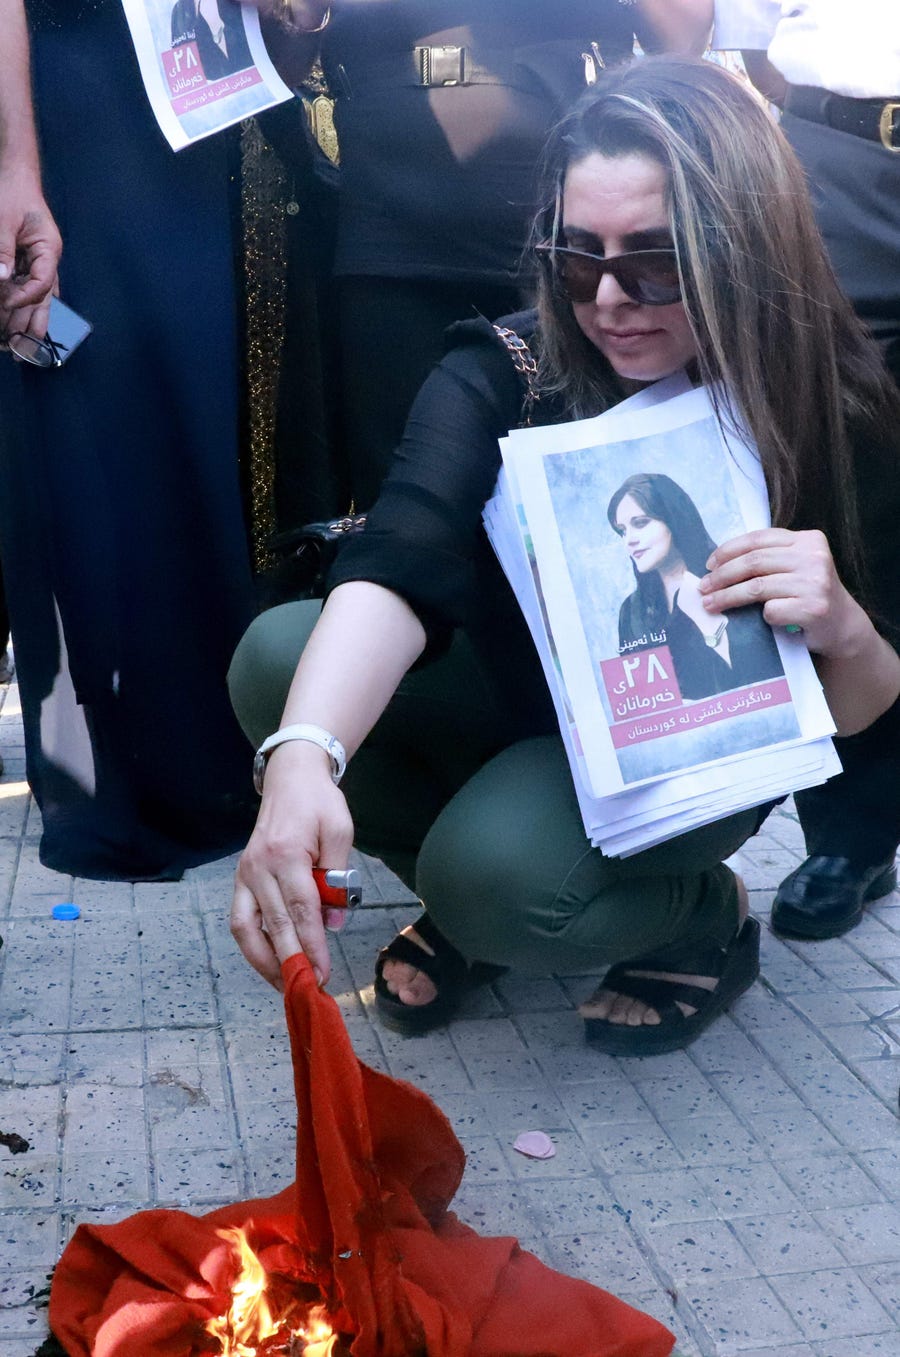 Iranian Kurds set a headscarf on fire during a march in a park in the Iraq Kurdish city of Sulaimaniya on September 19, 2022, against the killing of of Mahsa Amini, a woman in Iran who died after being arrested by the Islamic republic's "morality police". - Amini, 22, was on a visit with her family to the Iranian capital when she was detained on September 13 by the police unit responsible for enforcing Iran's strict dress code for women, including the wearing of the headscarf in public. She   was declared dead on September 16 by state television after having spent three days in a coma.